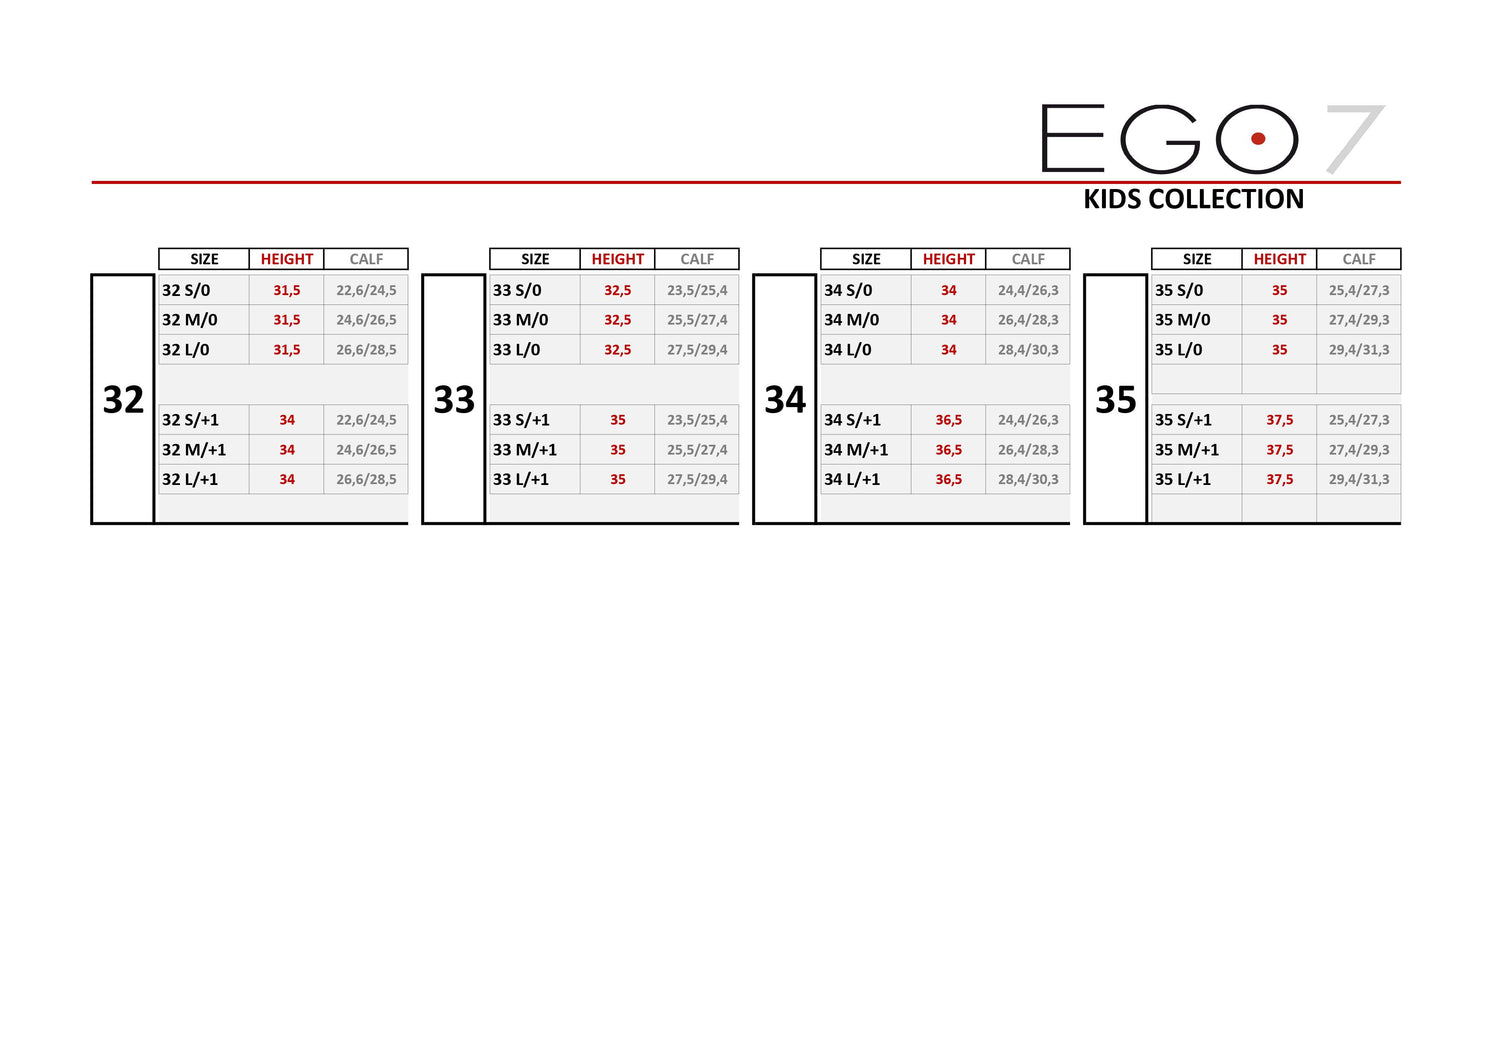 Ego7 childrens boots size chart